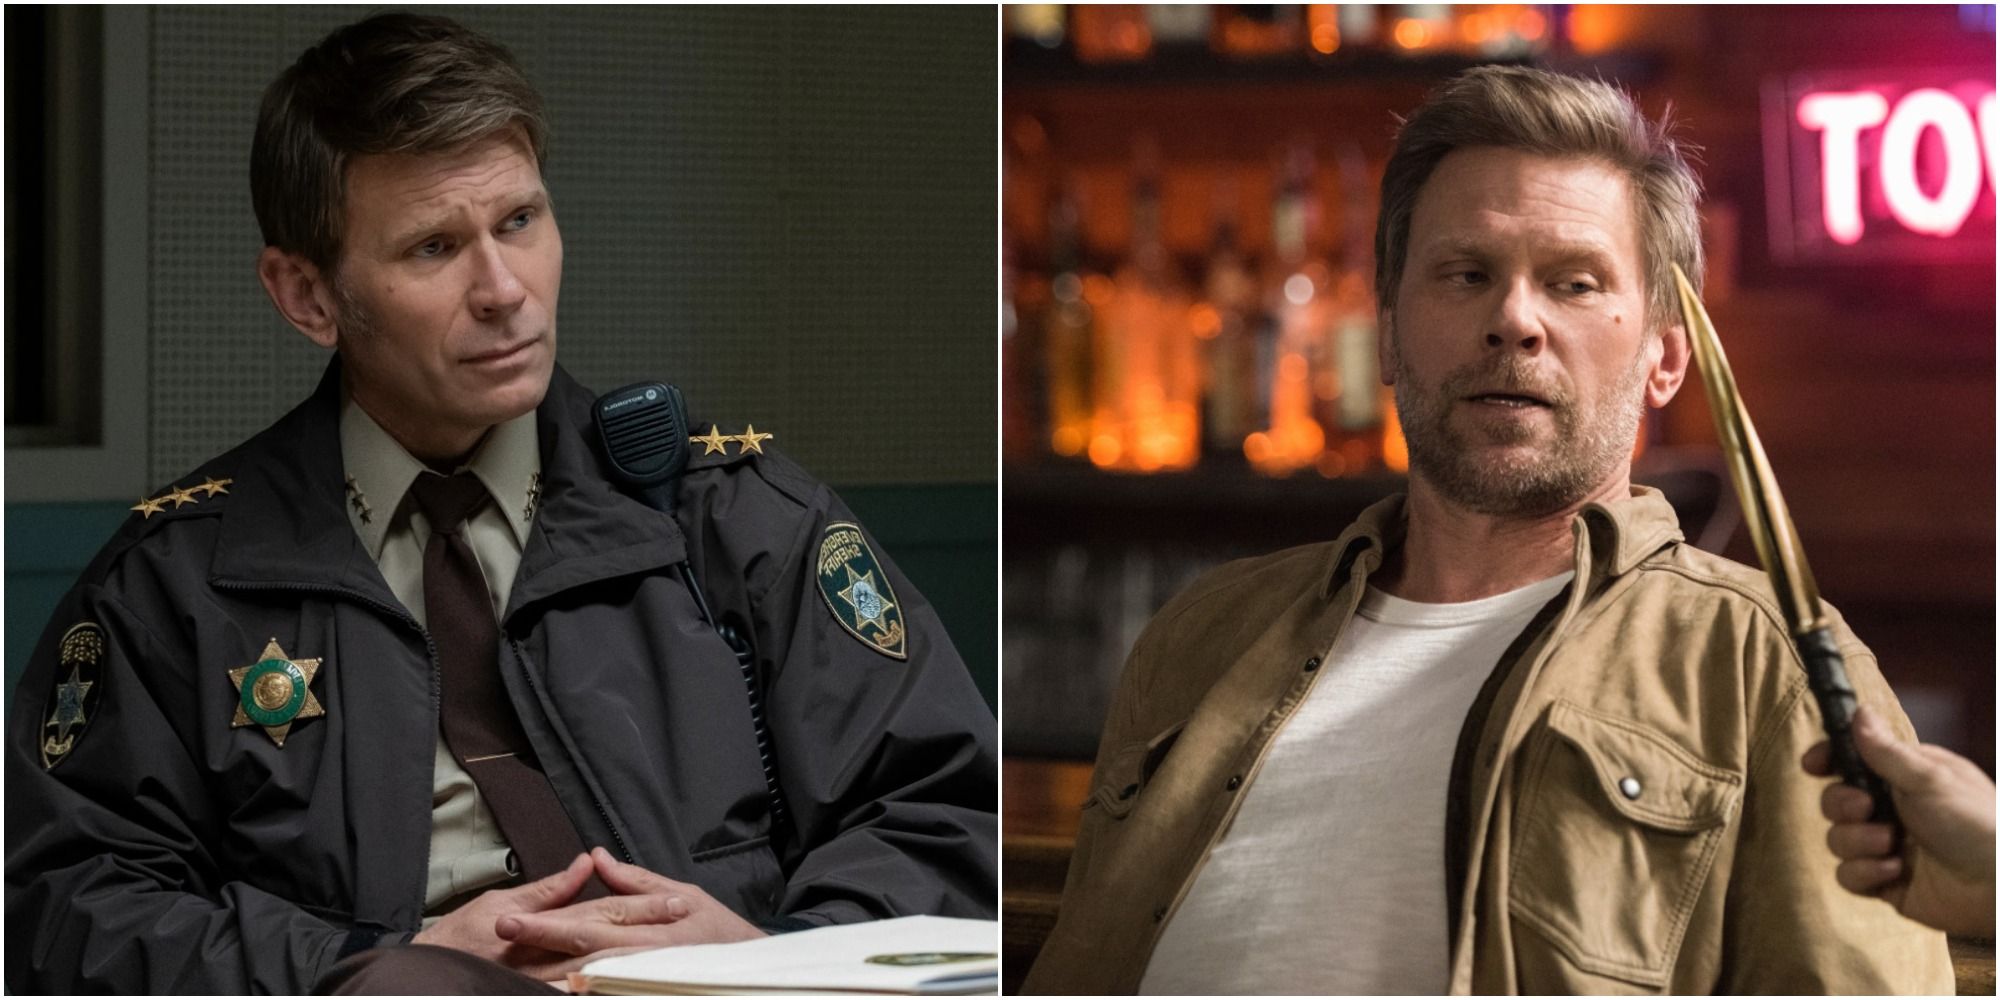 Mark-Pellegrino-In-13-Reasons-Why-and-Supernatural